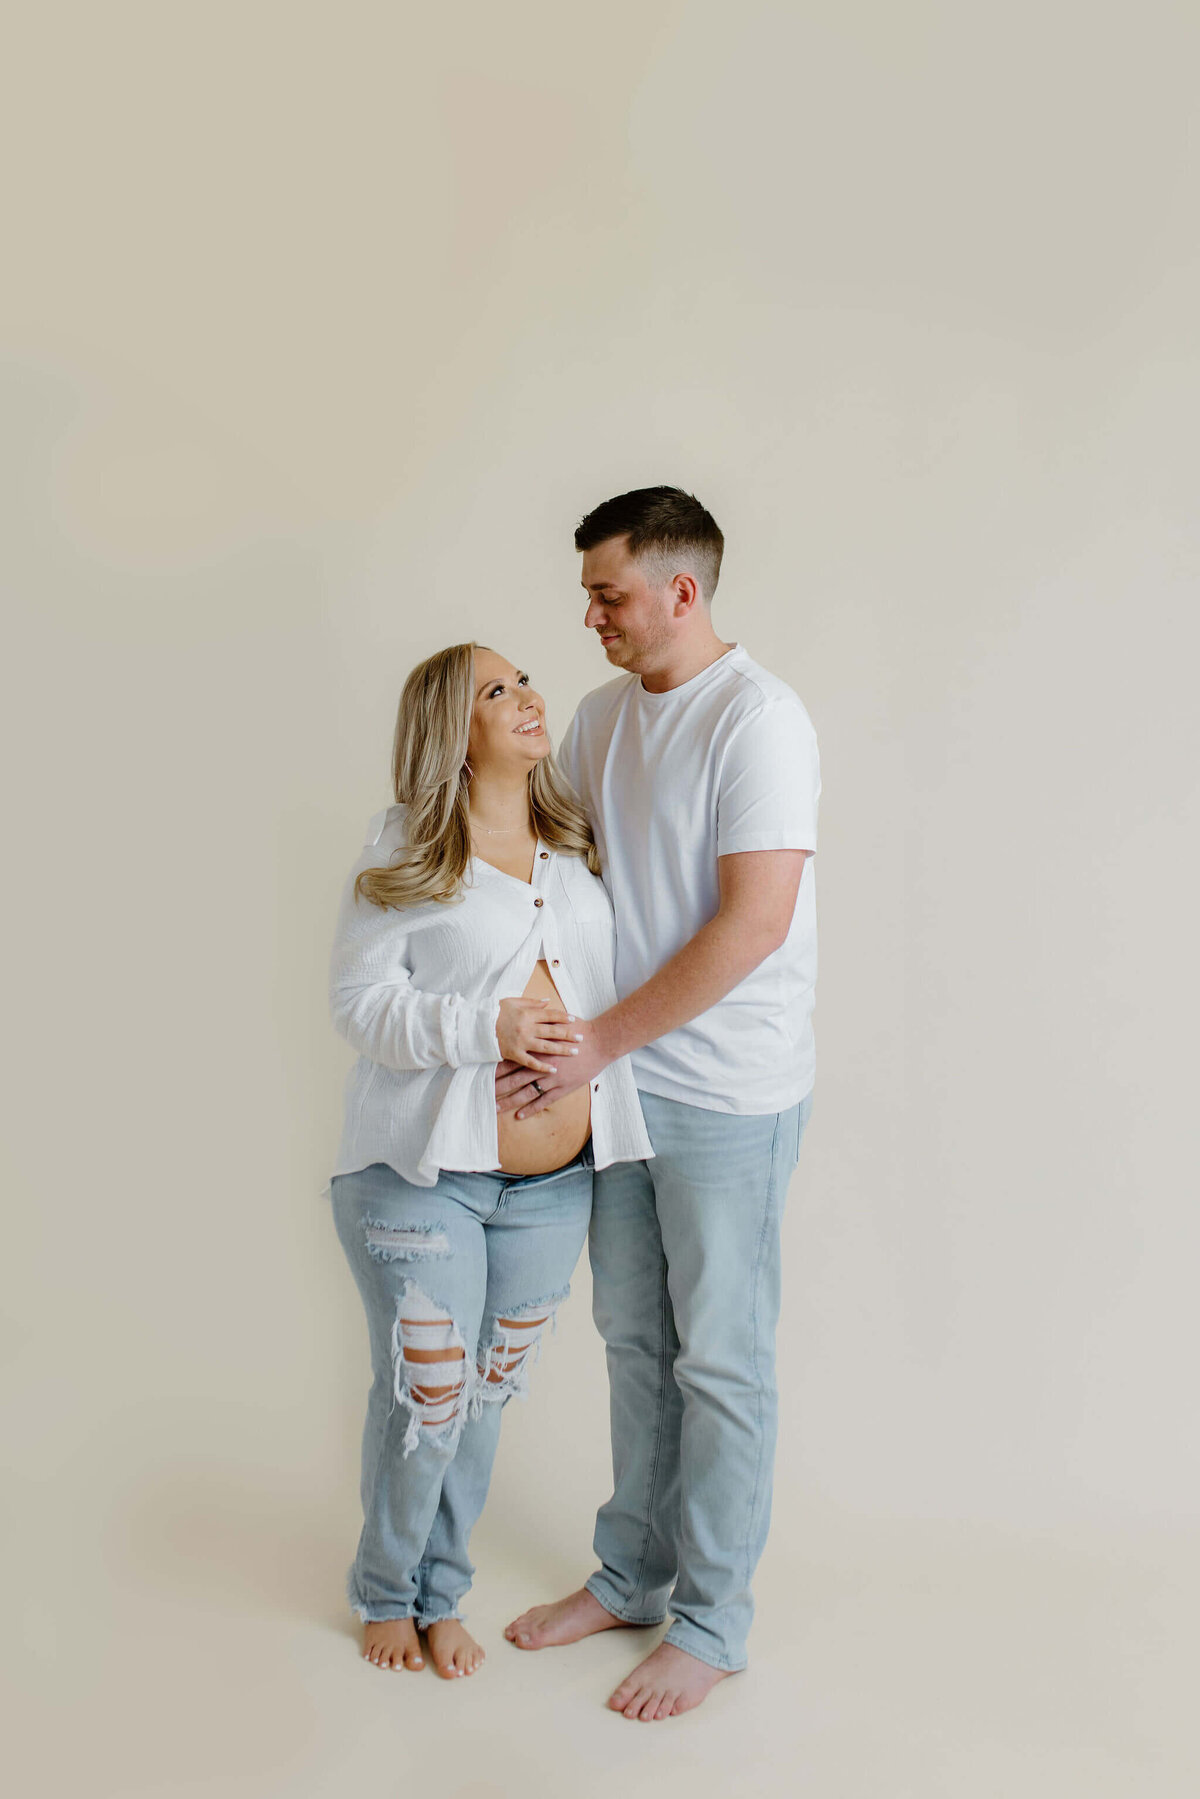 Studio maternity portraits of expecting parents in white shirts and jeans